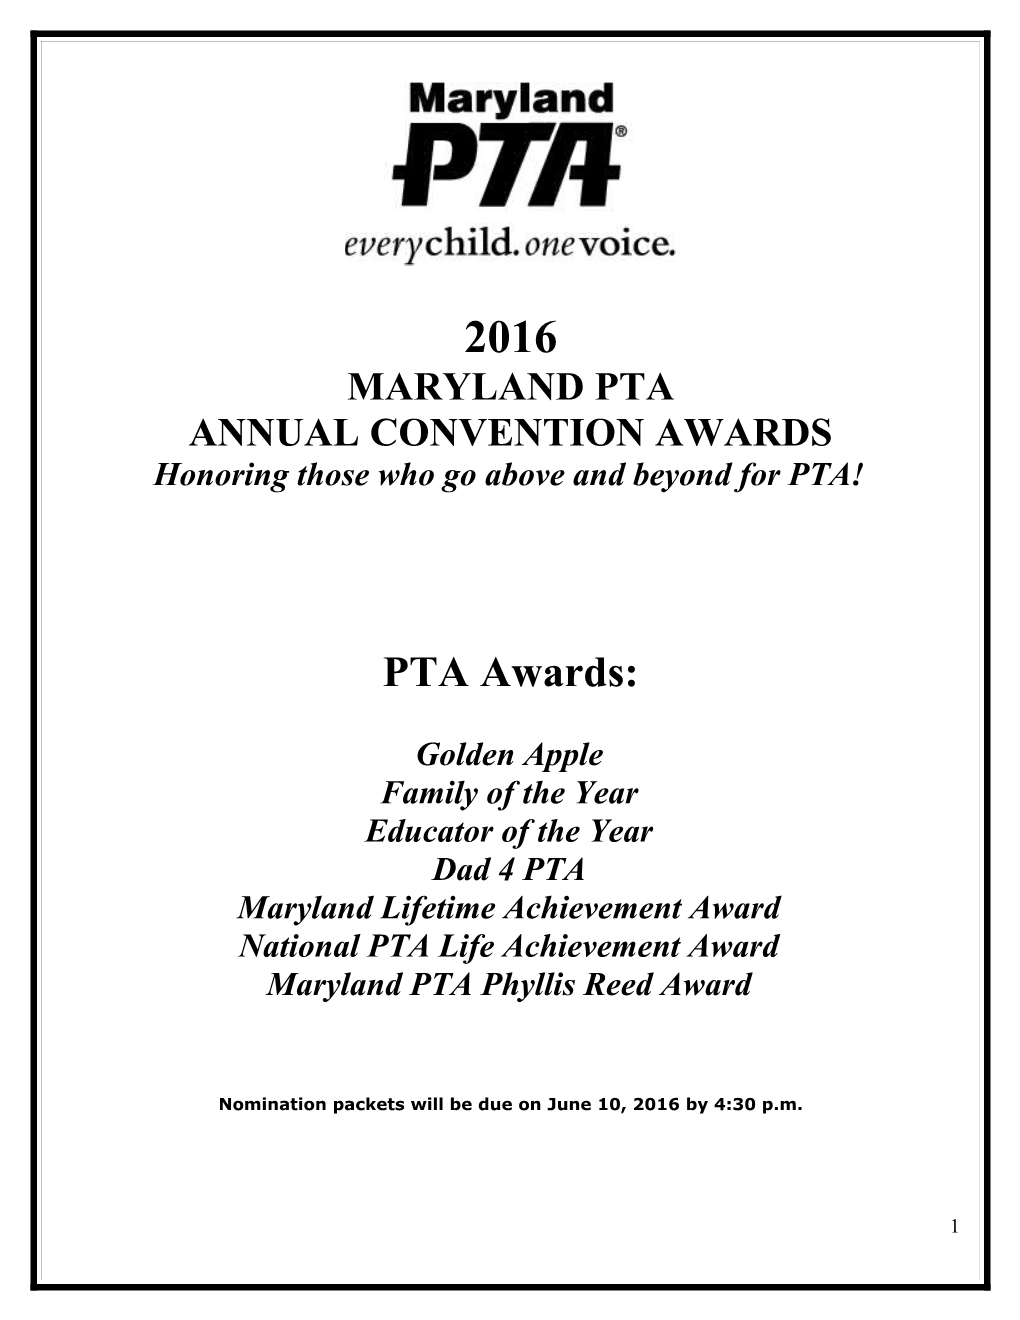 Honoring Those Who Go Above and Beyond for PTA!